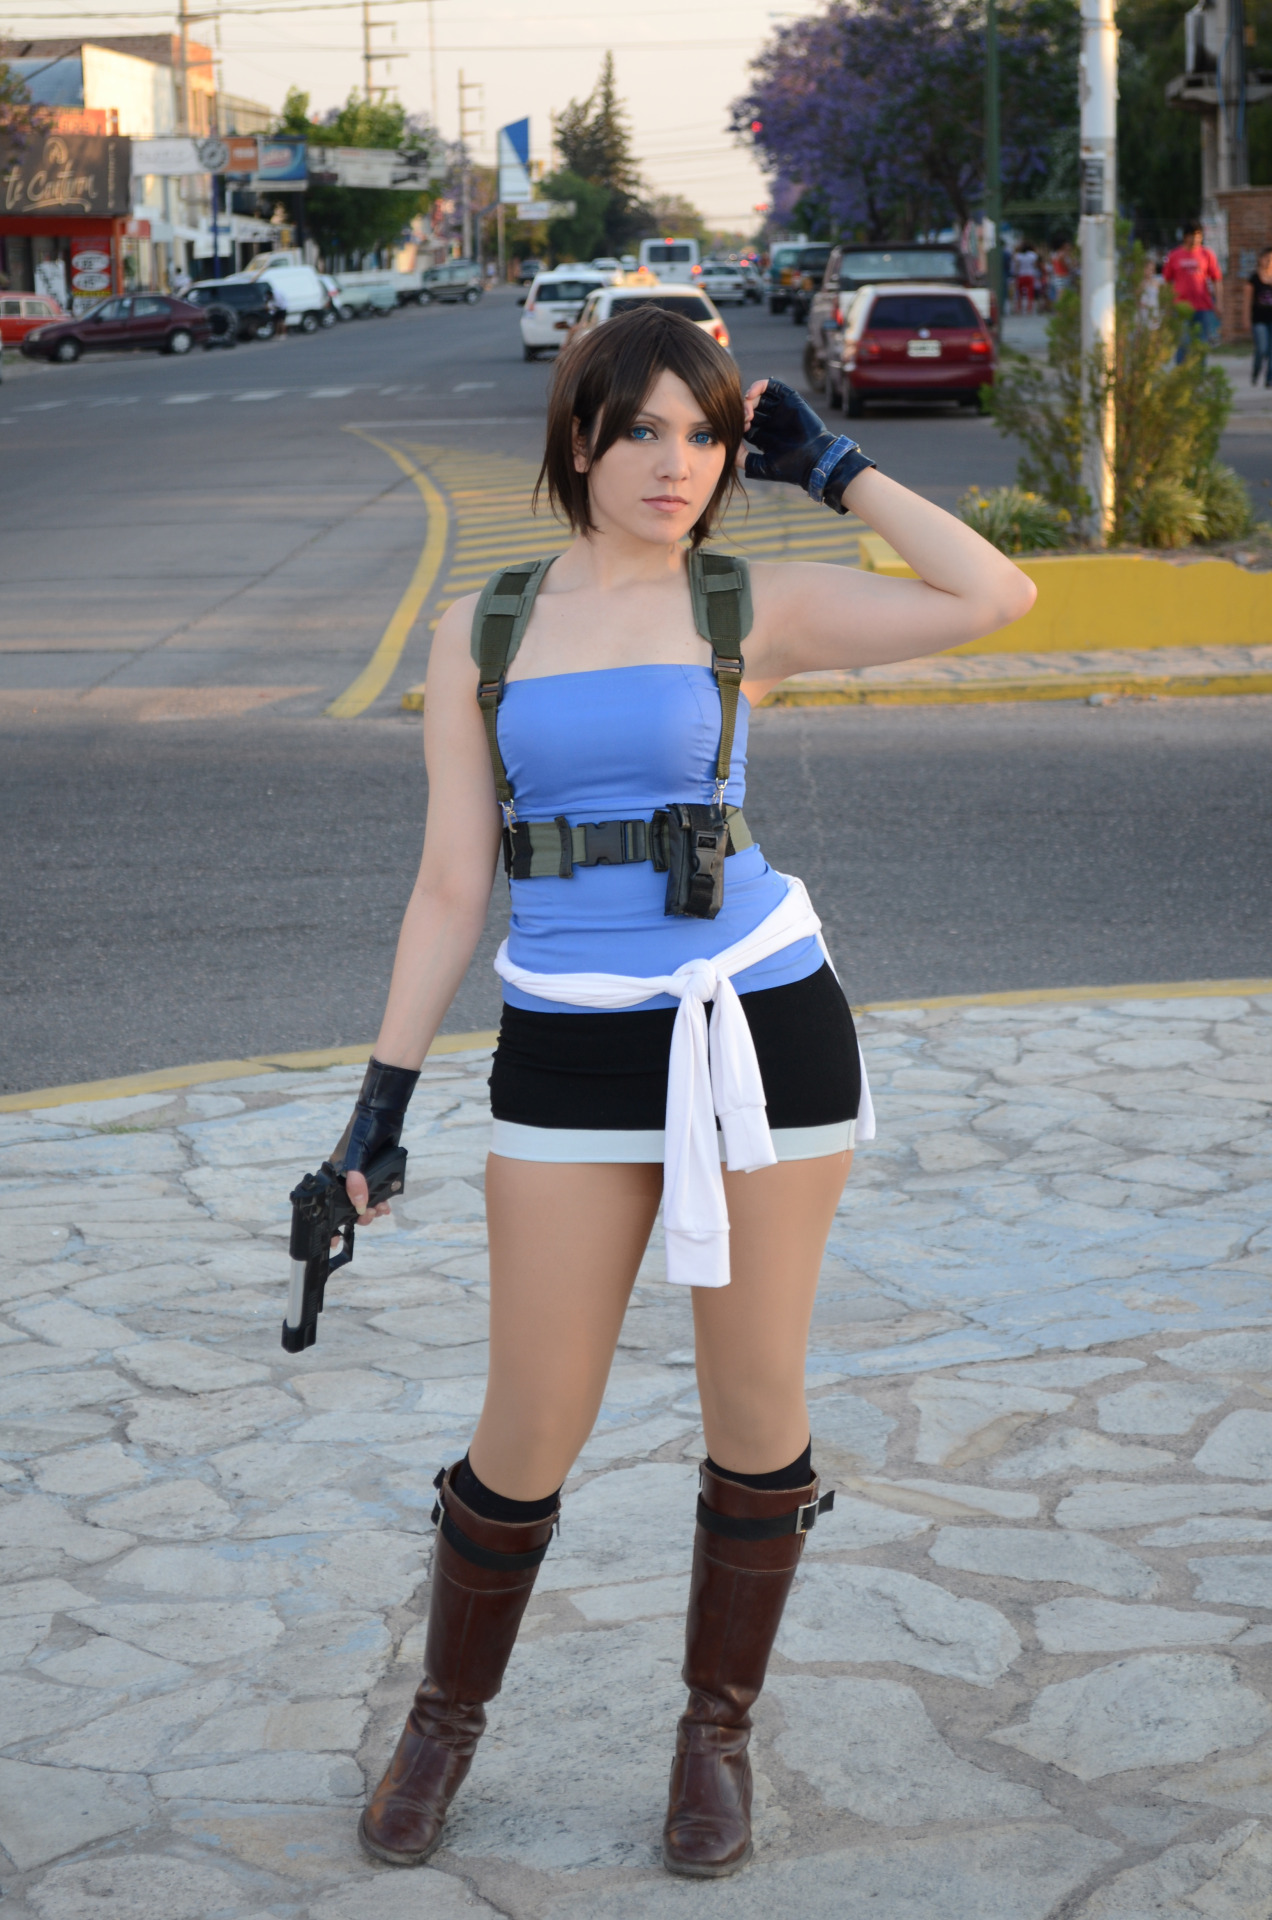 This Resident Evil Actress' Jill Valentine Cosplay Is Perfect